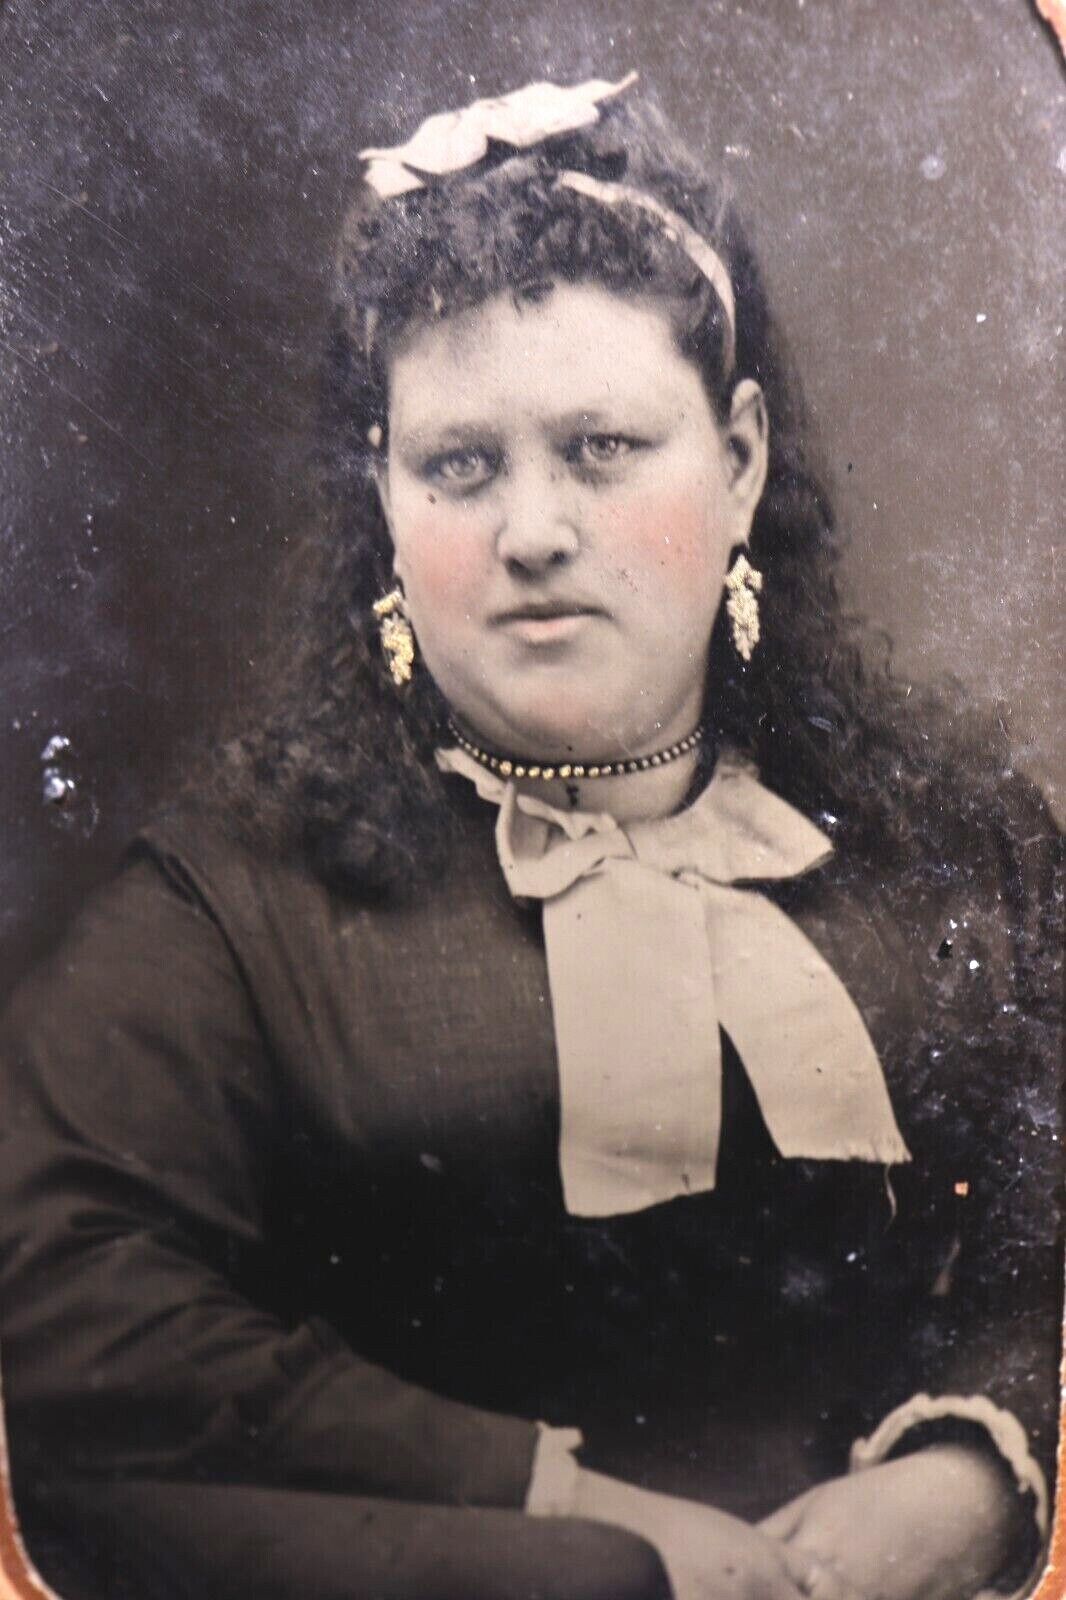 ANTIQUE CIVIL WAR ERA TINTYPE PHOTO OF A VERY FAT OBESE WOMAN WITH JEWELRY